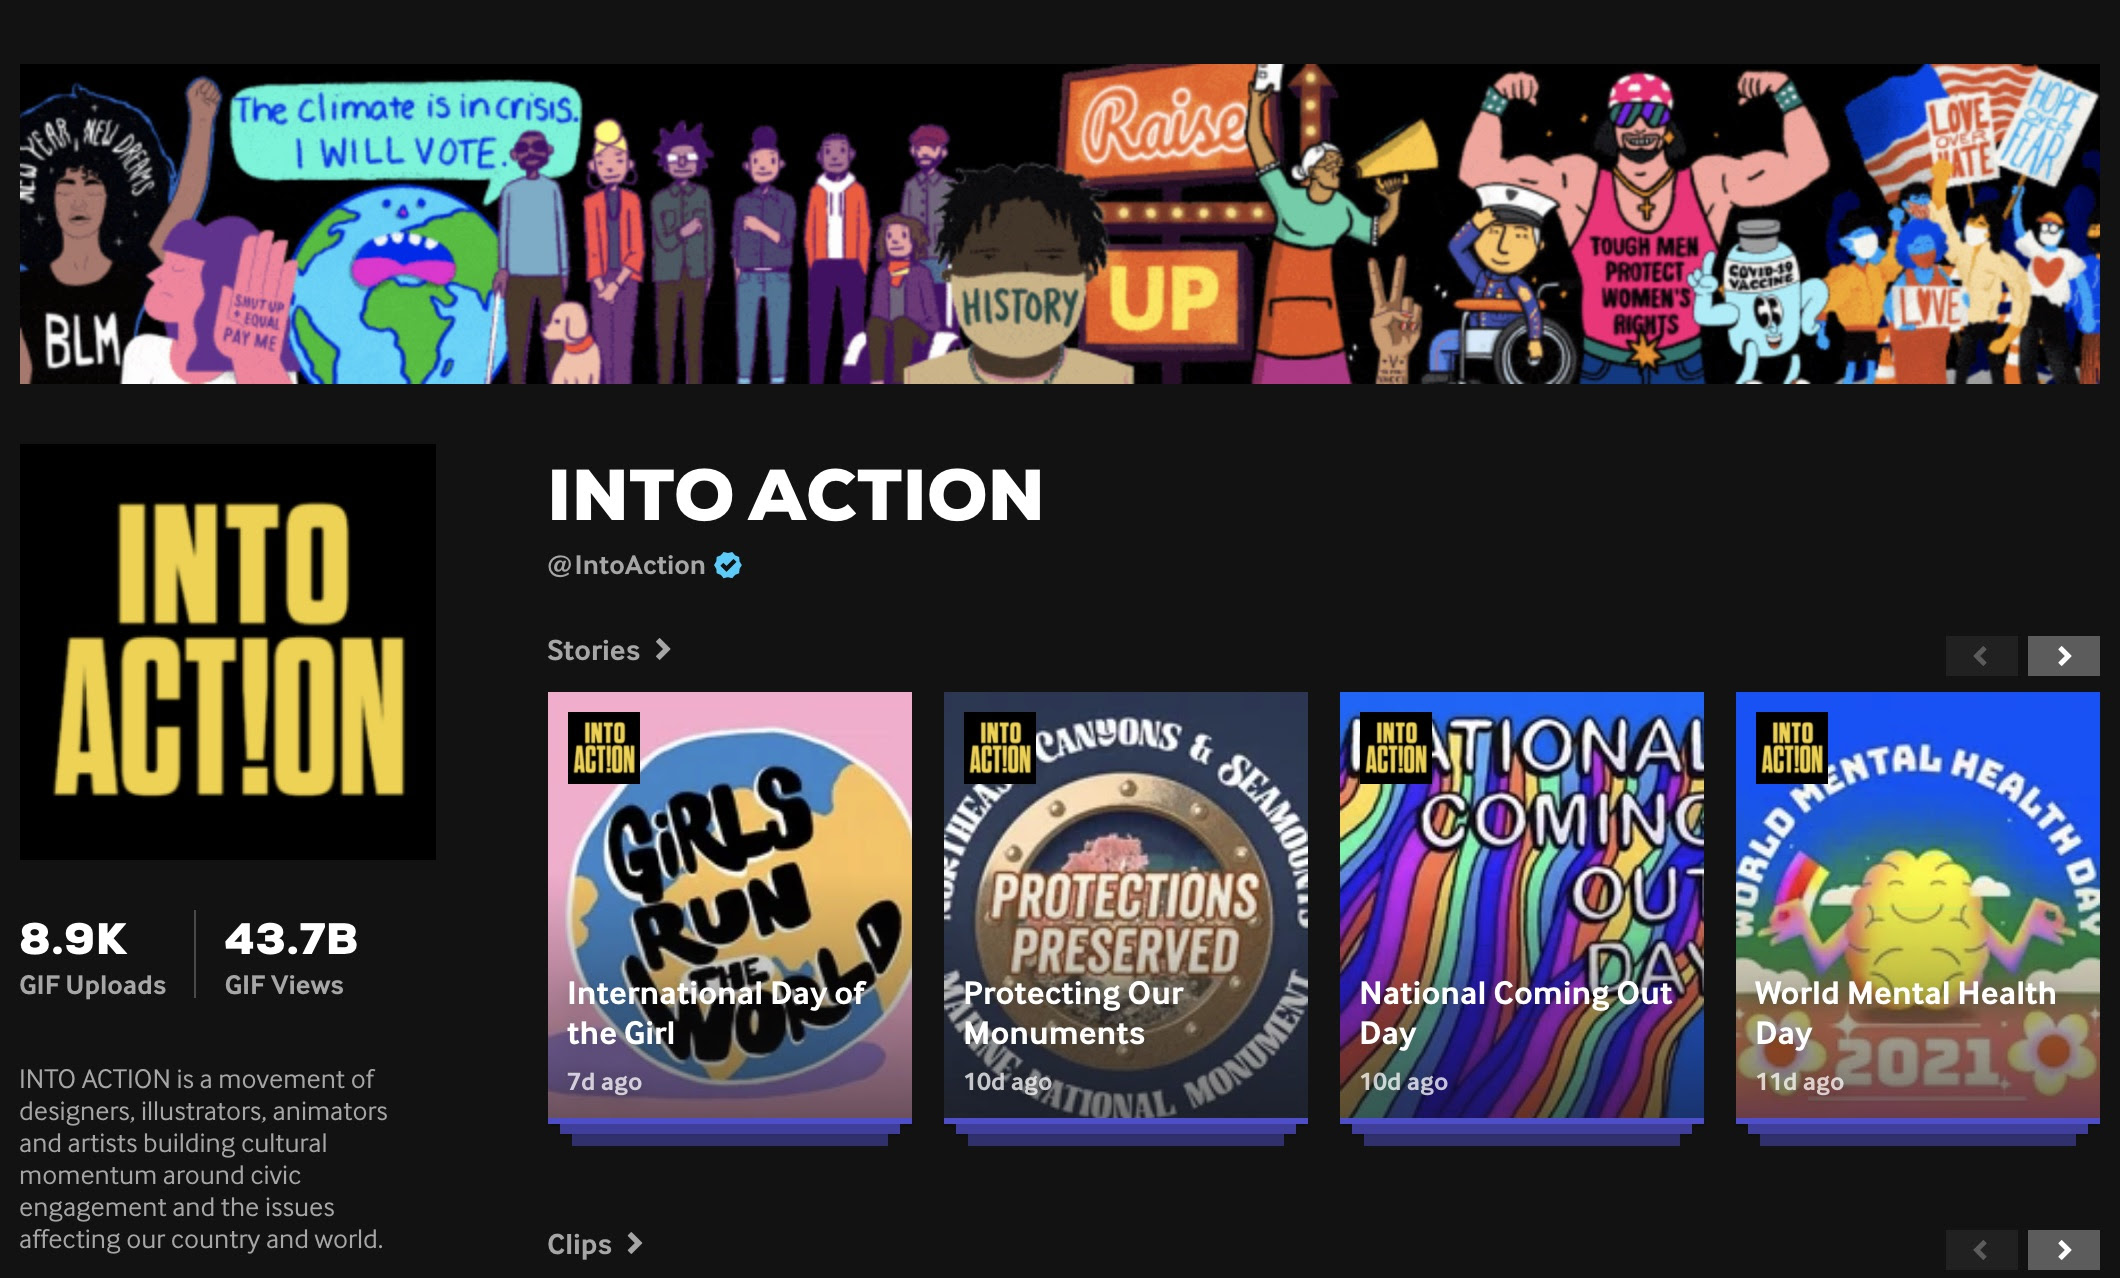 INTO ACTION is a movement of designers, illustrators, animators and artists building cultural momentum around civic engagement and the issues affecting our country and world.